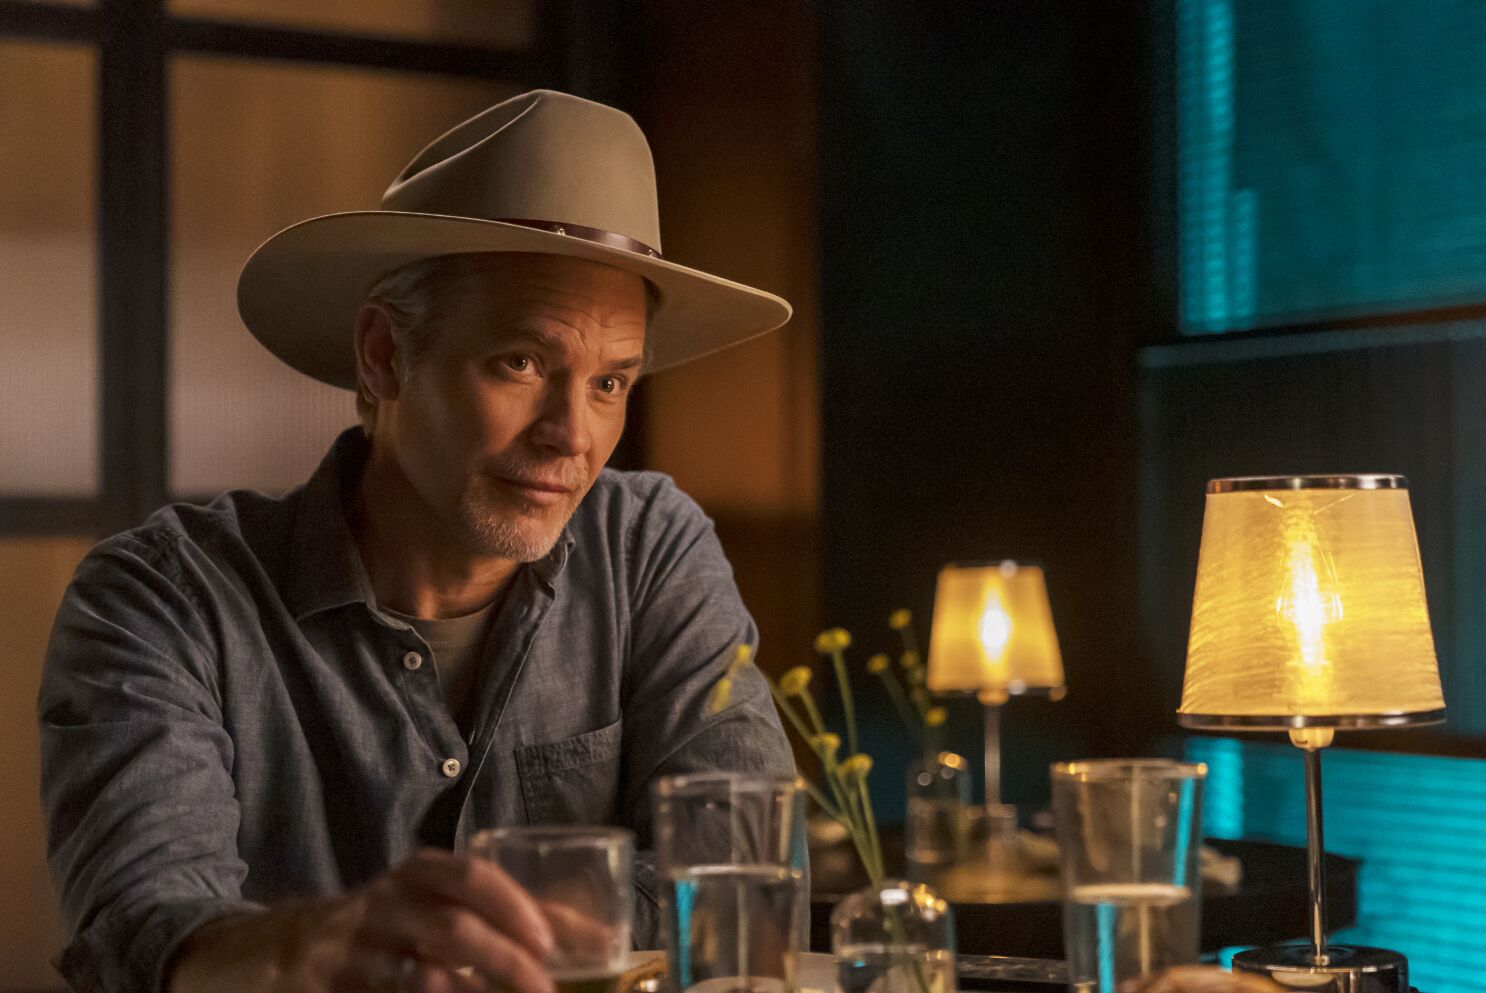 Justified: City Primeval Cast on FX and Hulu - Timothy Olyphant as Raylan Givens